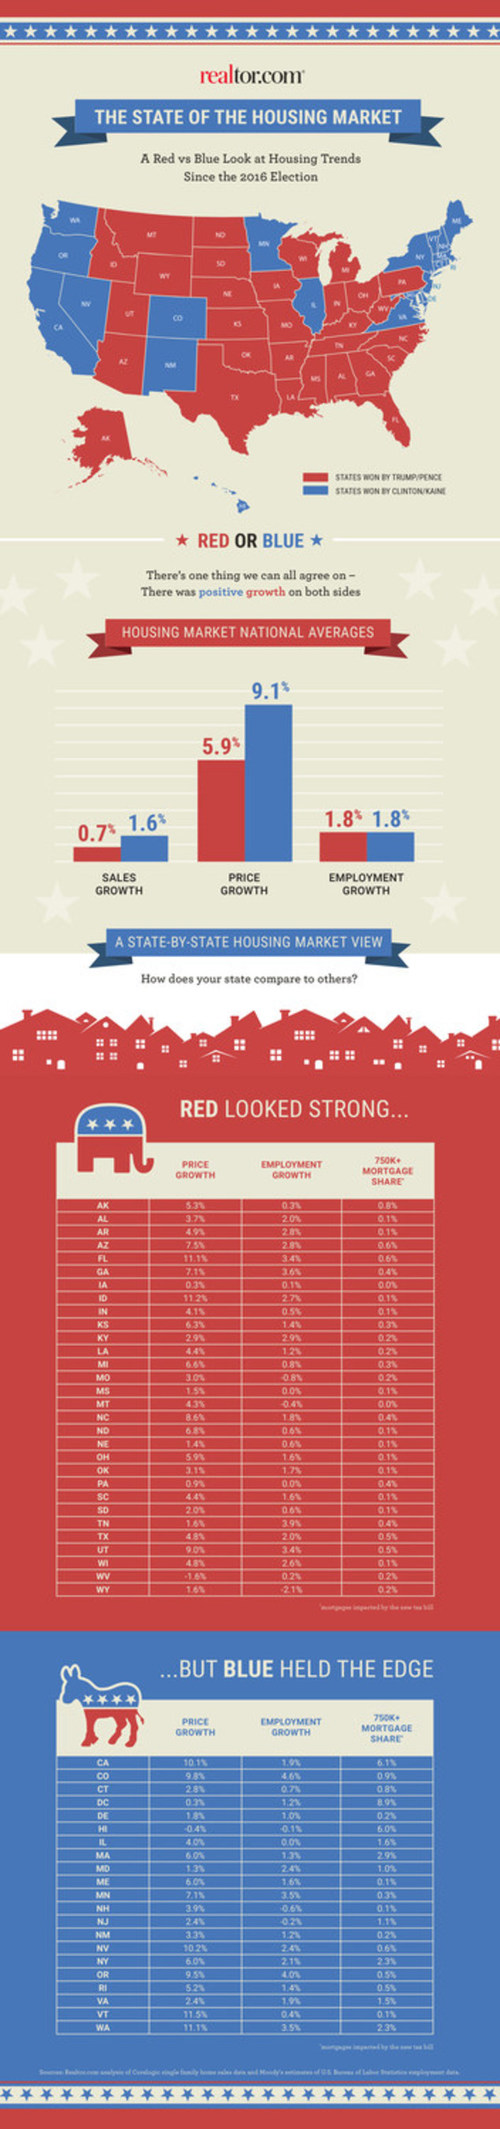 Realtor.com State of the Housing Union infographic